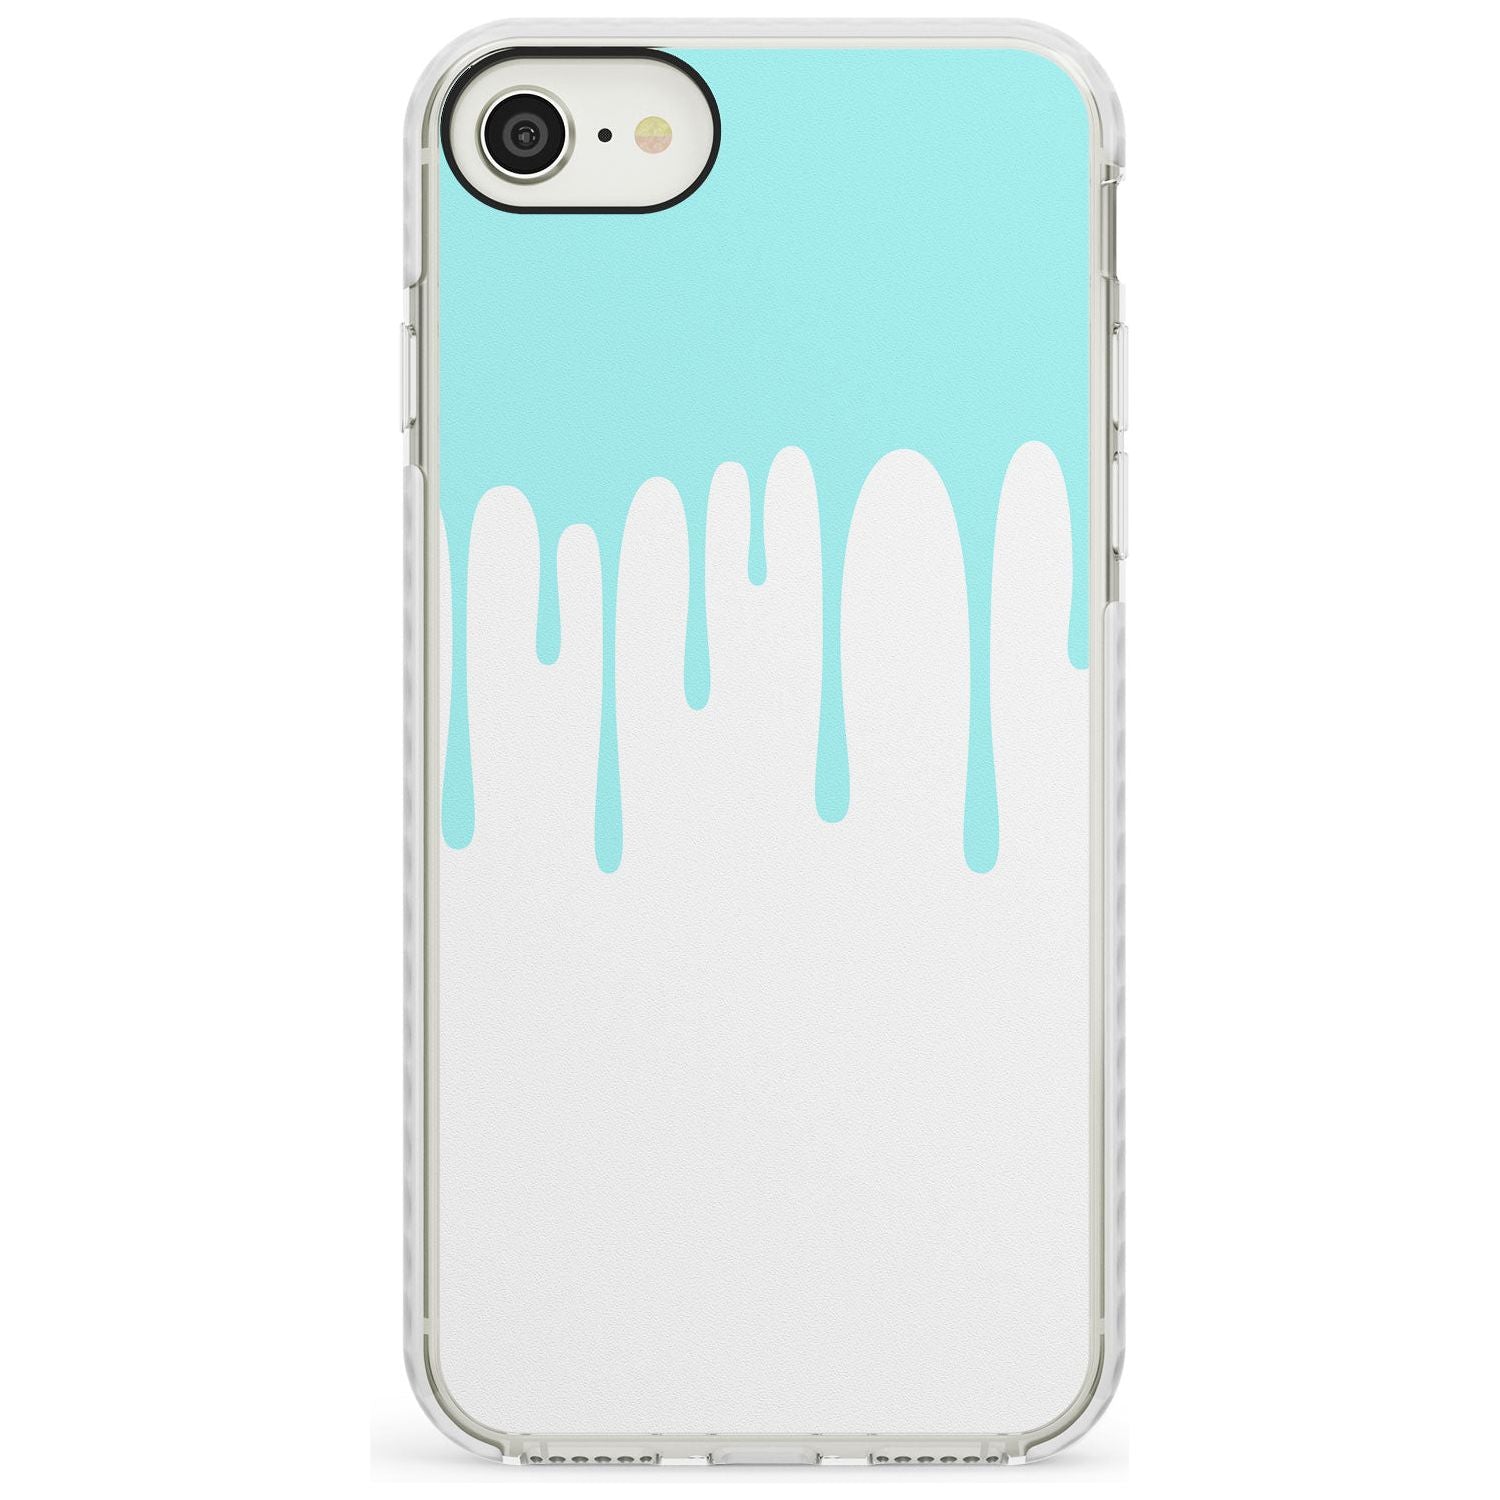 Melted Effect: Teal & White iPhone Case Impact Phone Case Warehouse SE 8 7 Plus